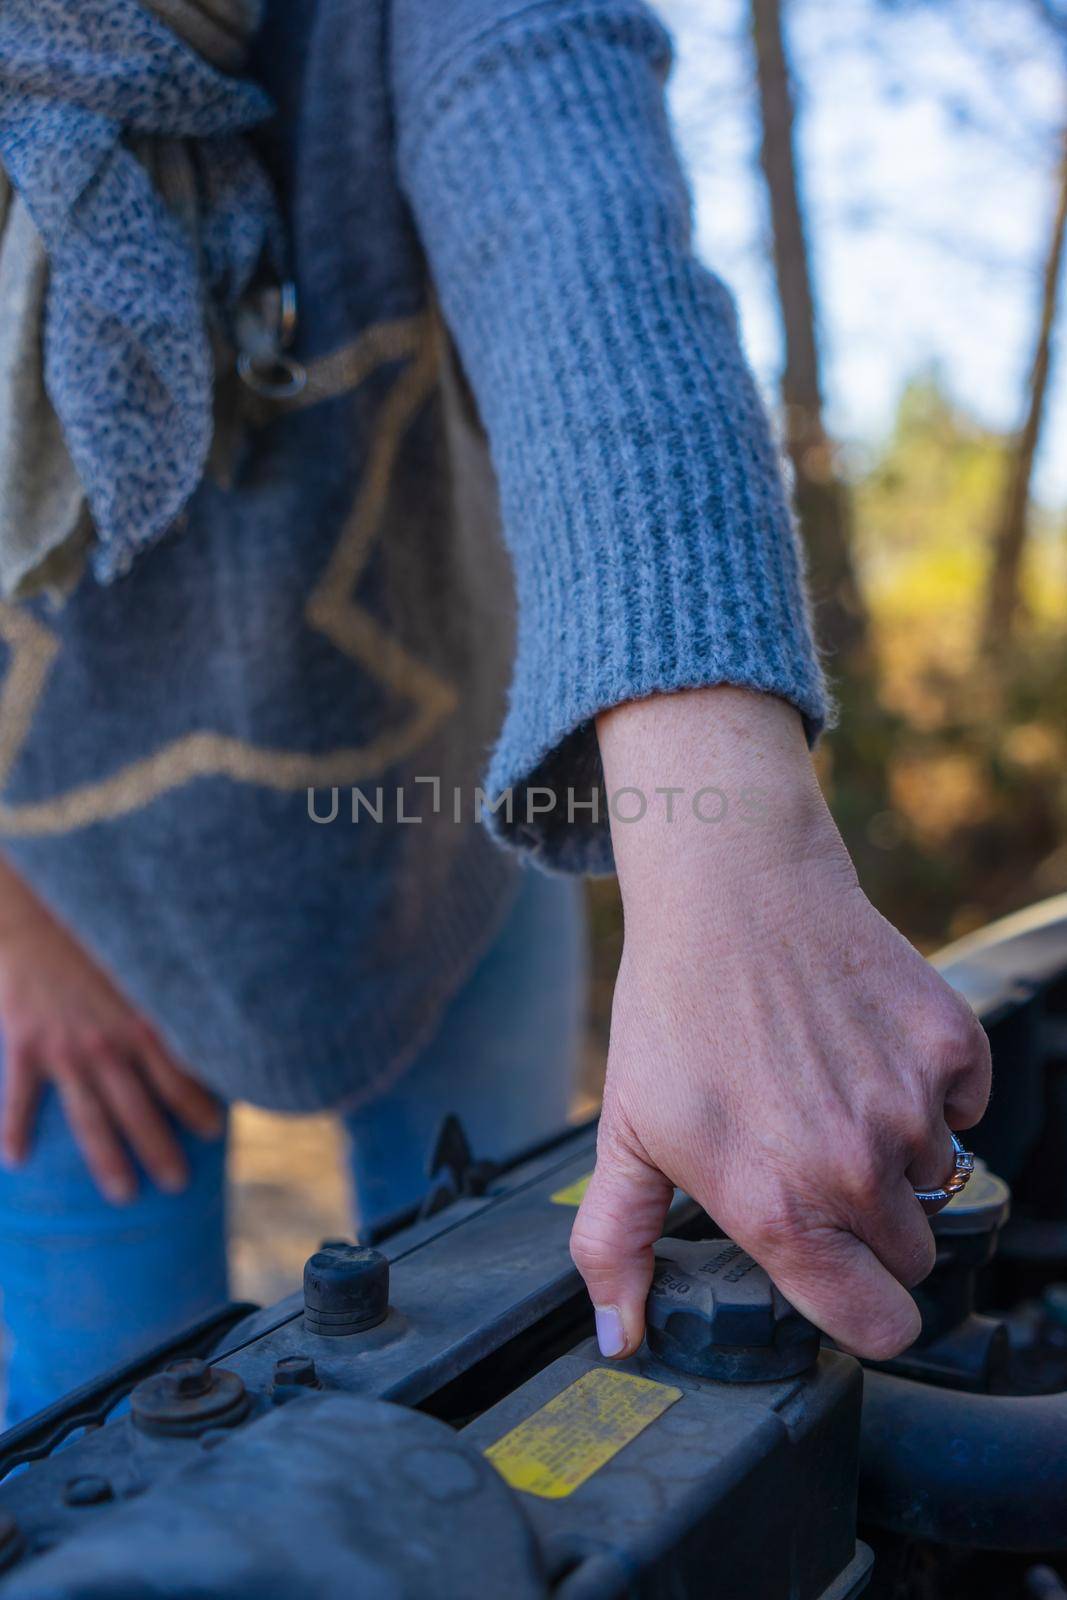 close-up of the hand of an adult woman repairing a car engine, with the bonnet open, wearing a blue jumper and blue jeans.